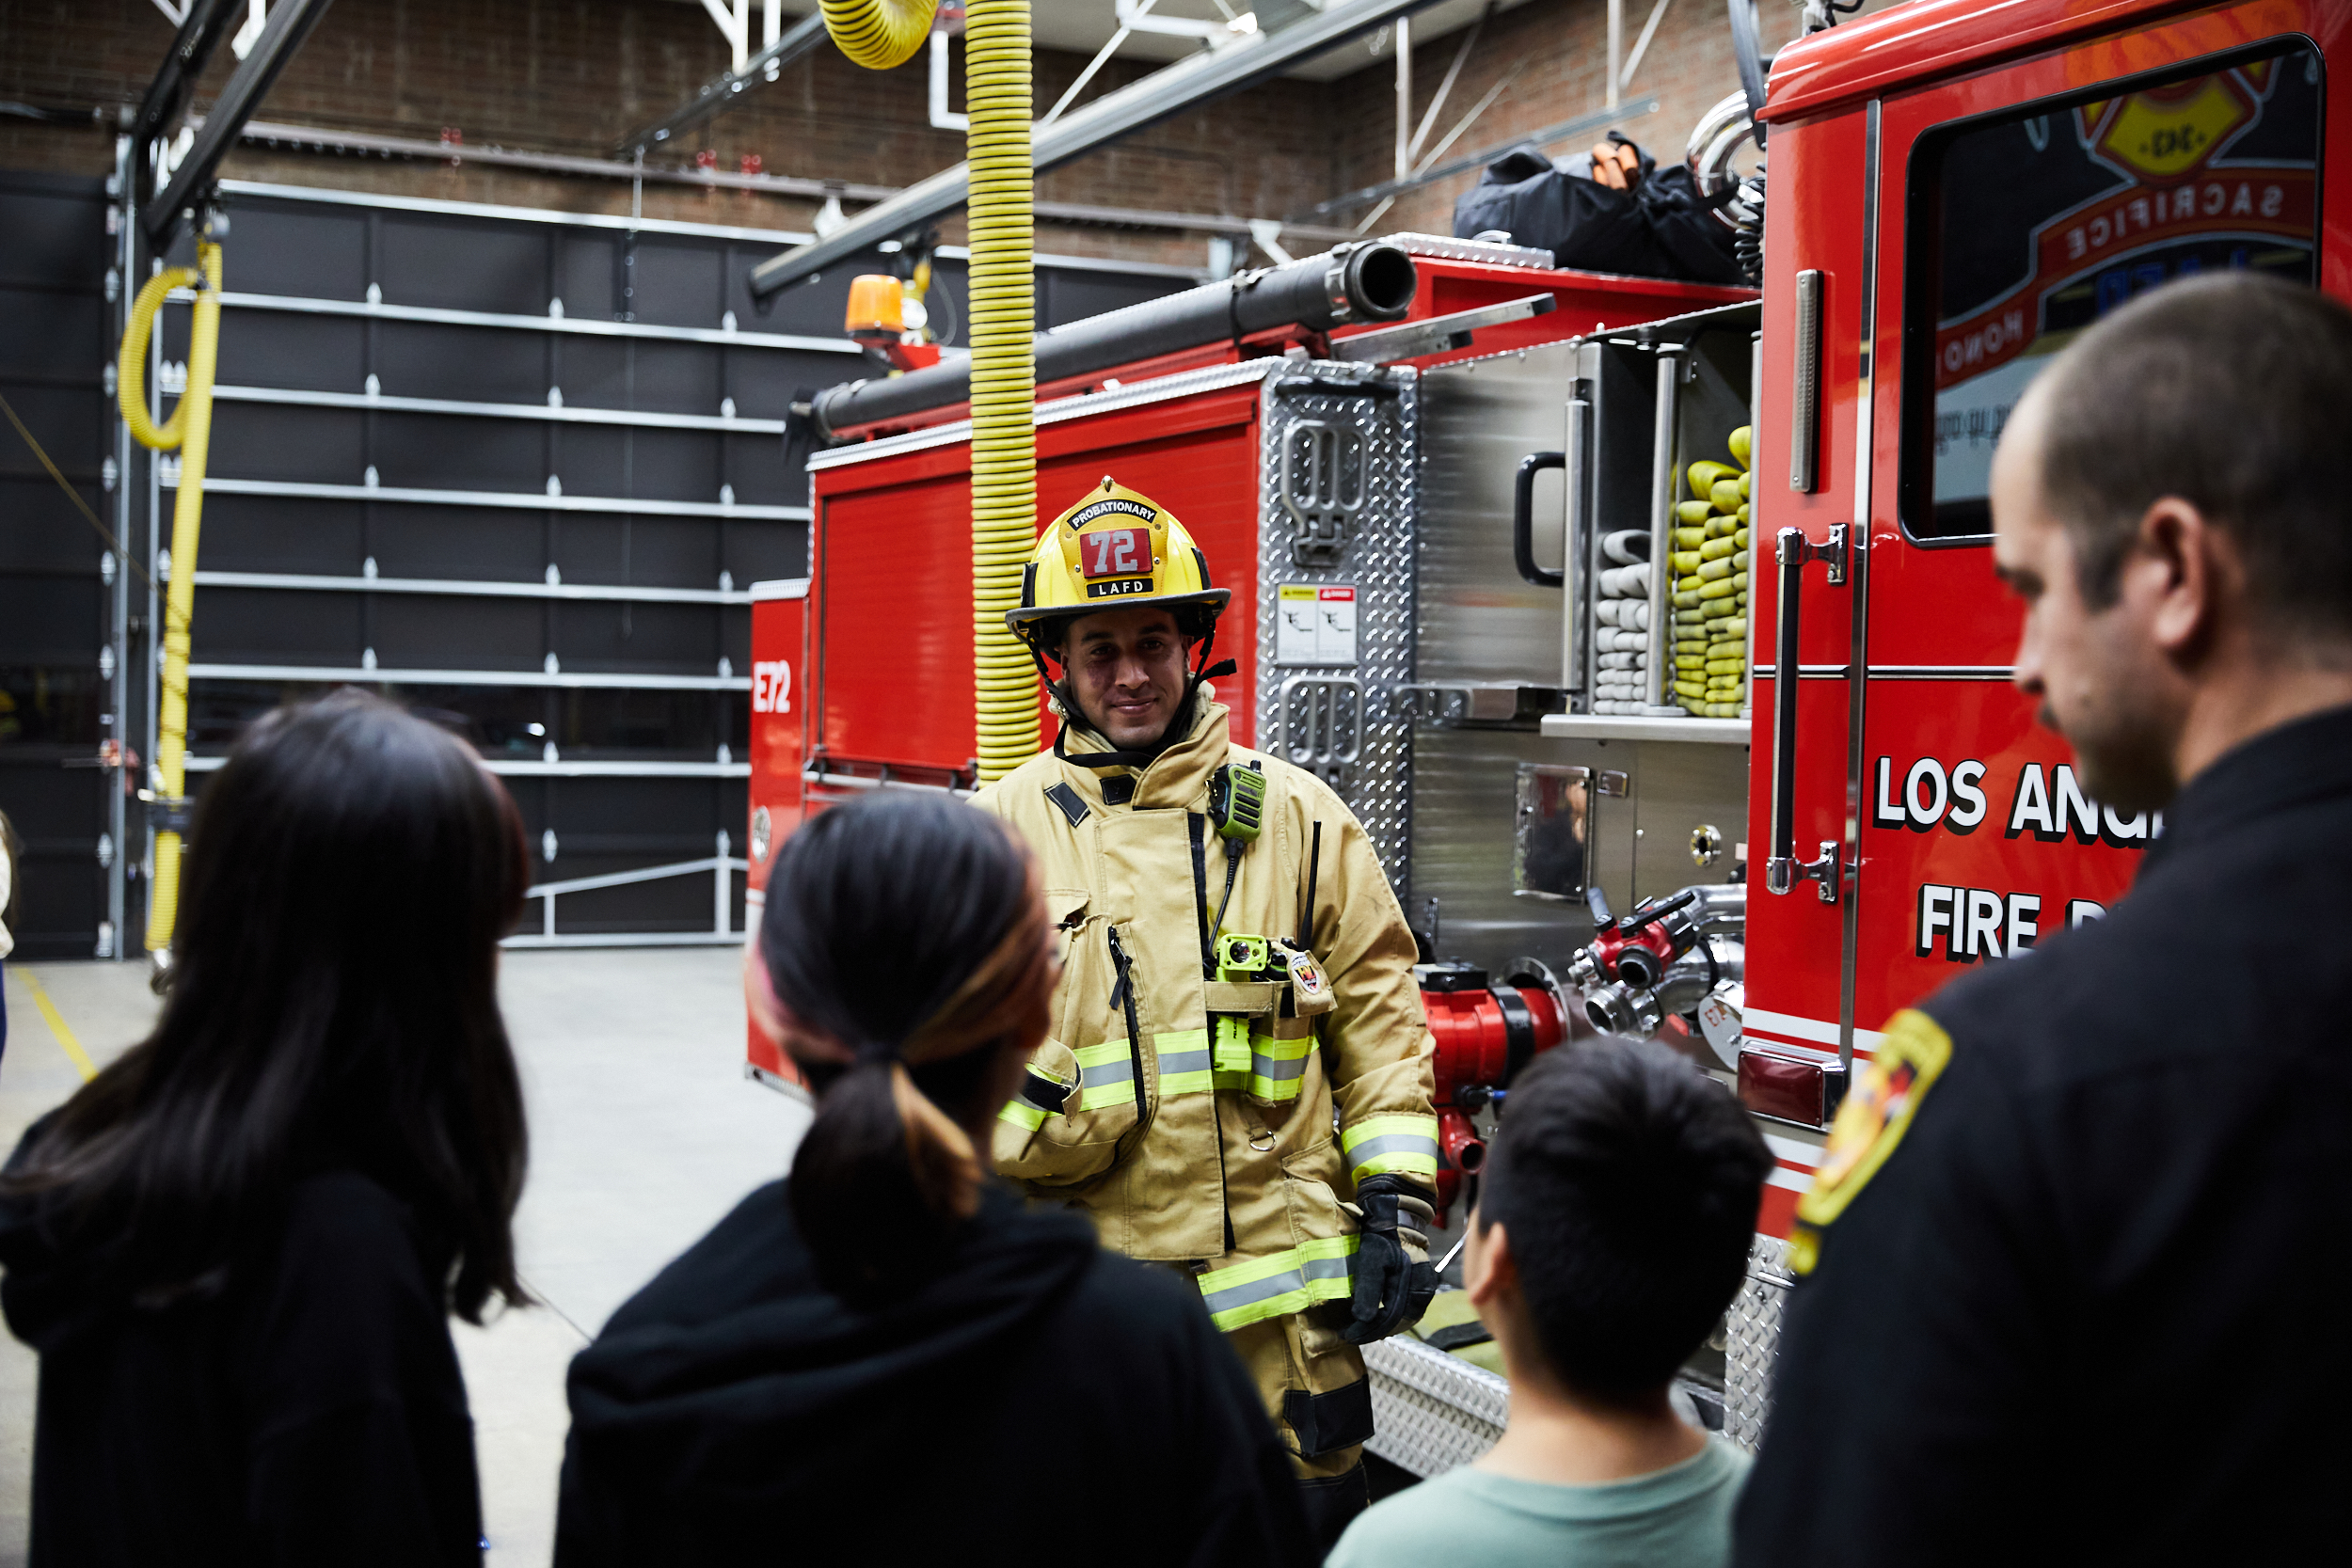 Firefighter pictured in full turnout gear with the families in the foreground and engine in the background